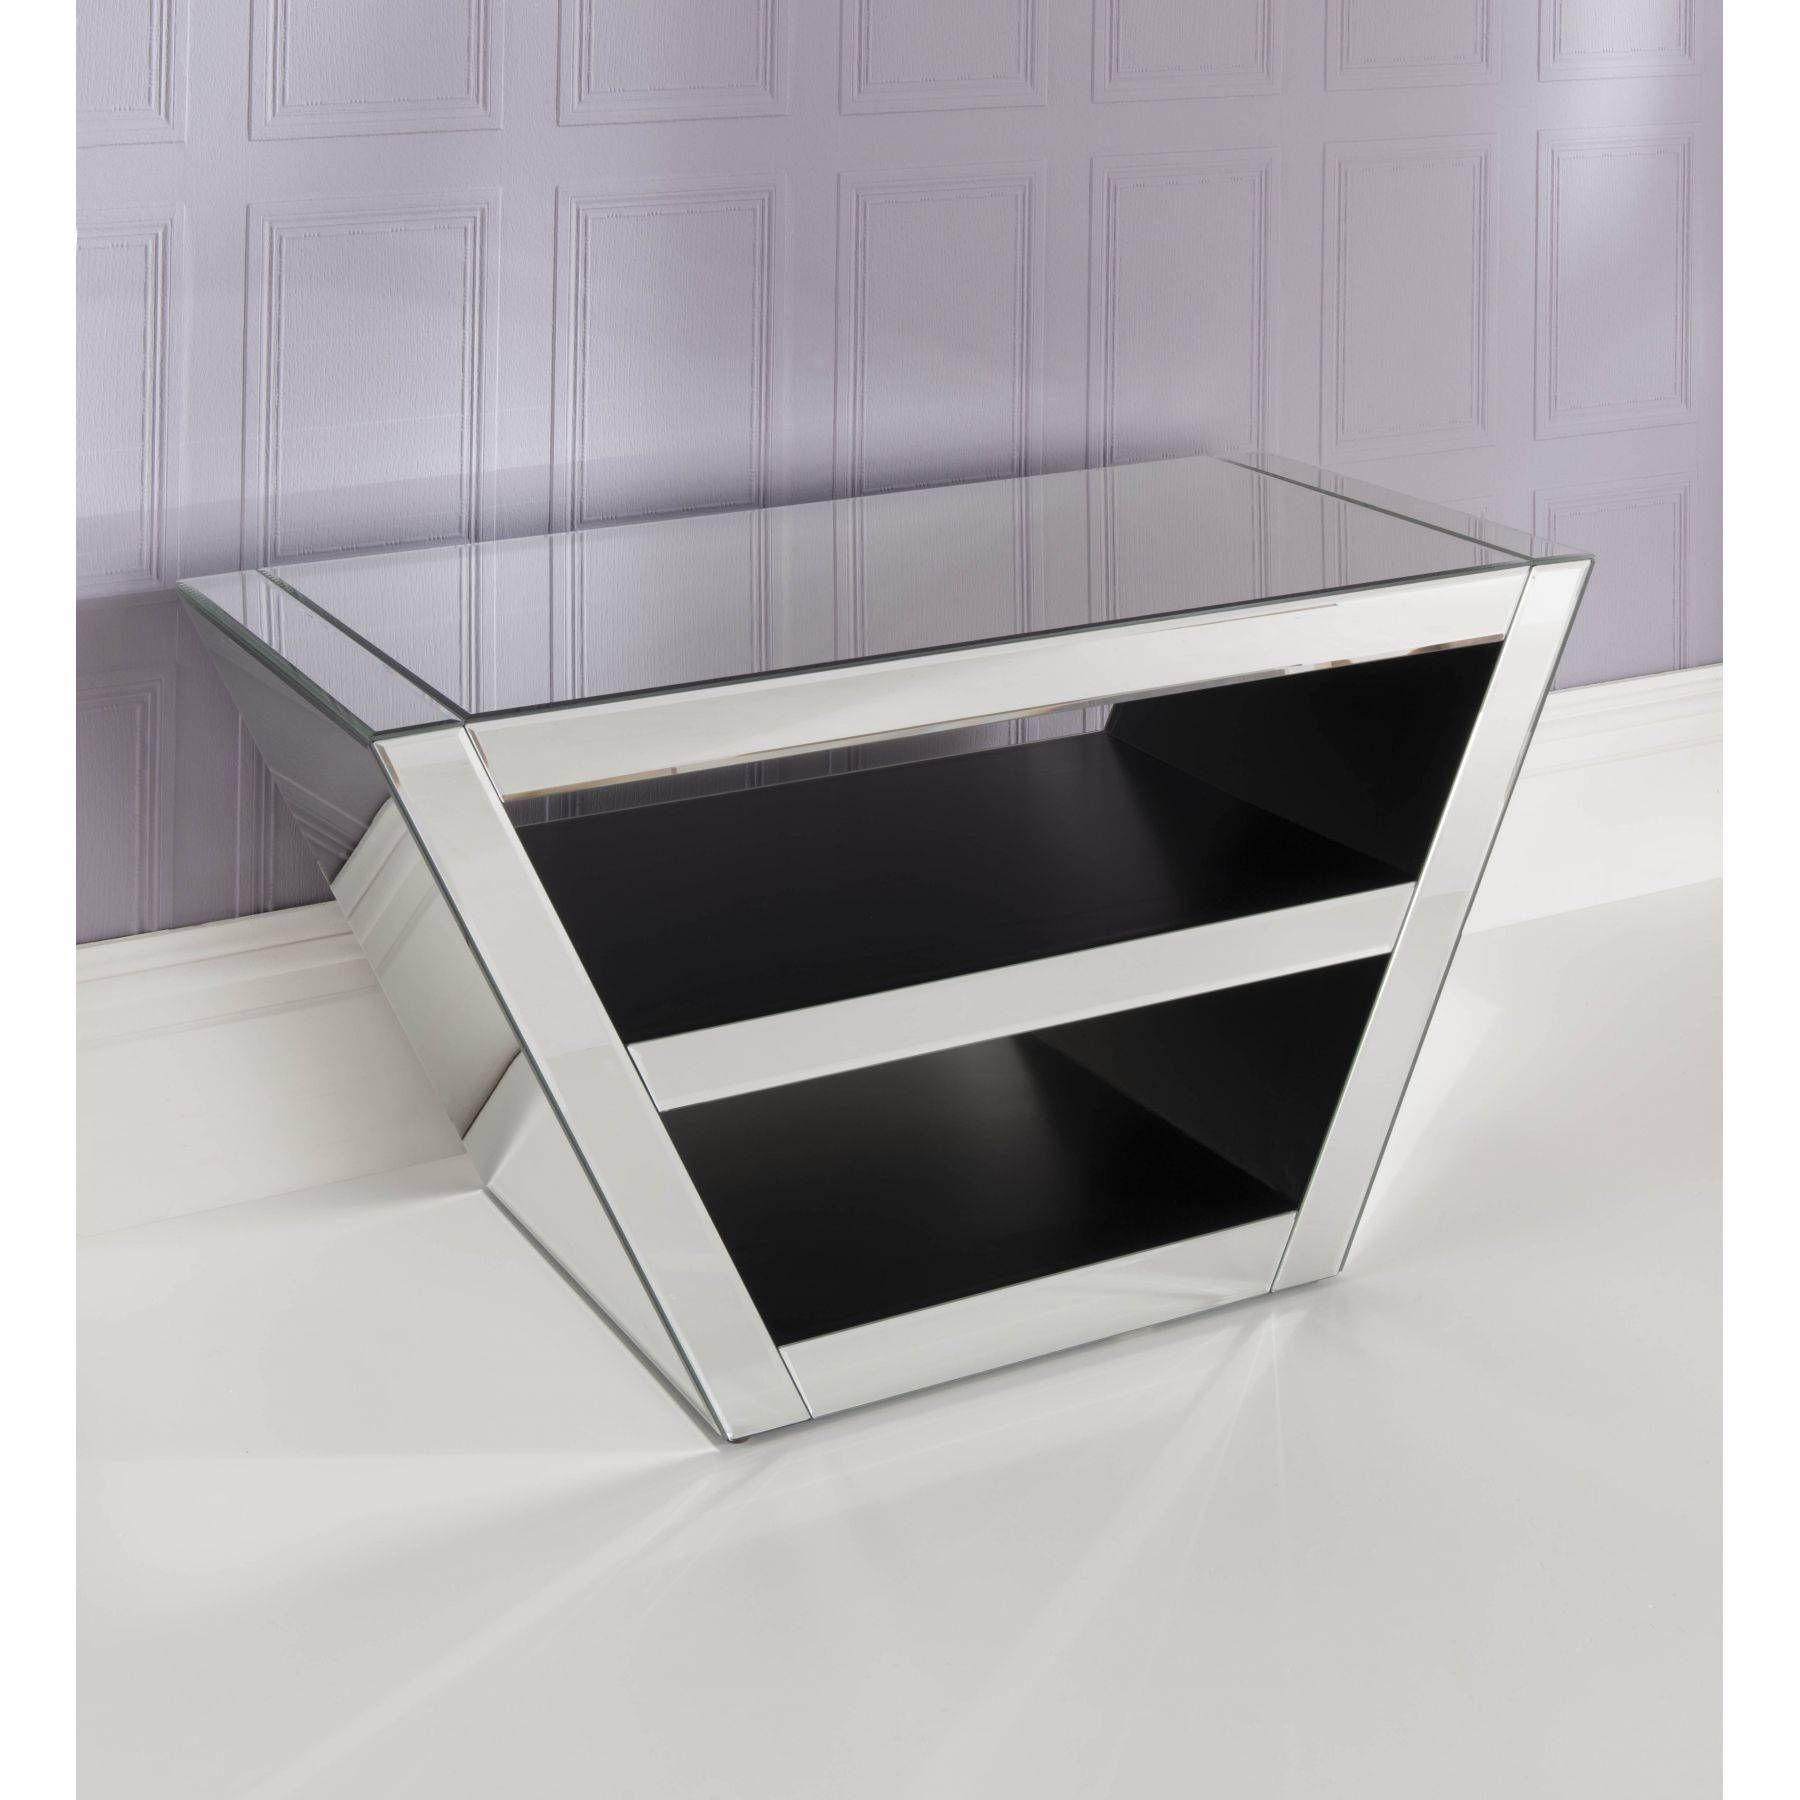 Mirrored Tv Cabinet | Venetian Glass Tv Stand | Homesdirect365 With Mirrored Tv Stands (View 2 of 15)